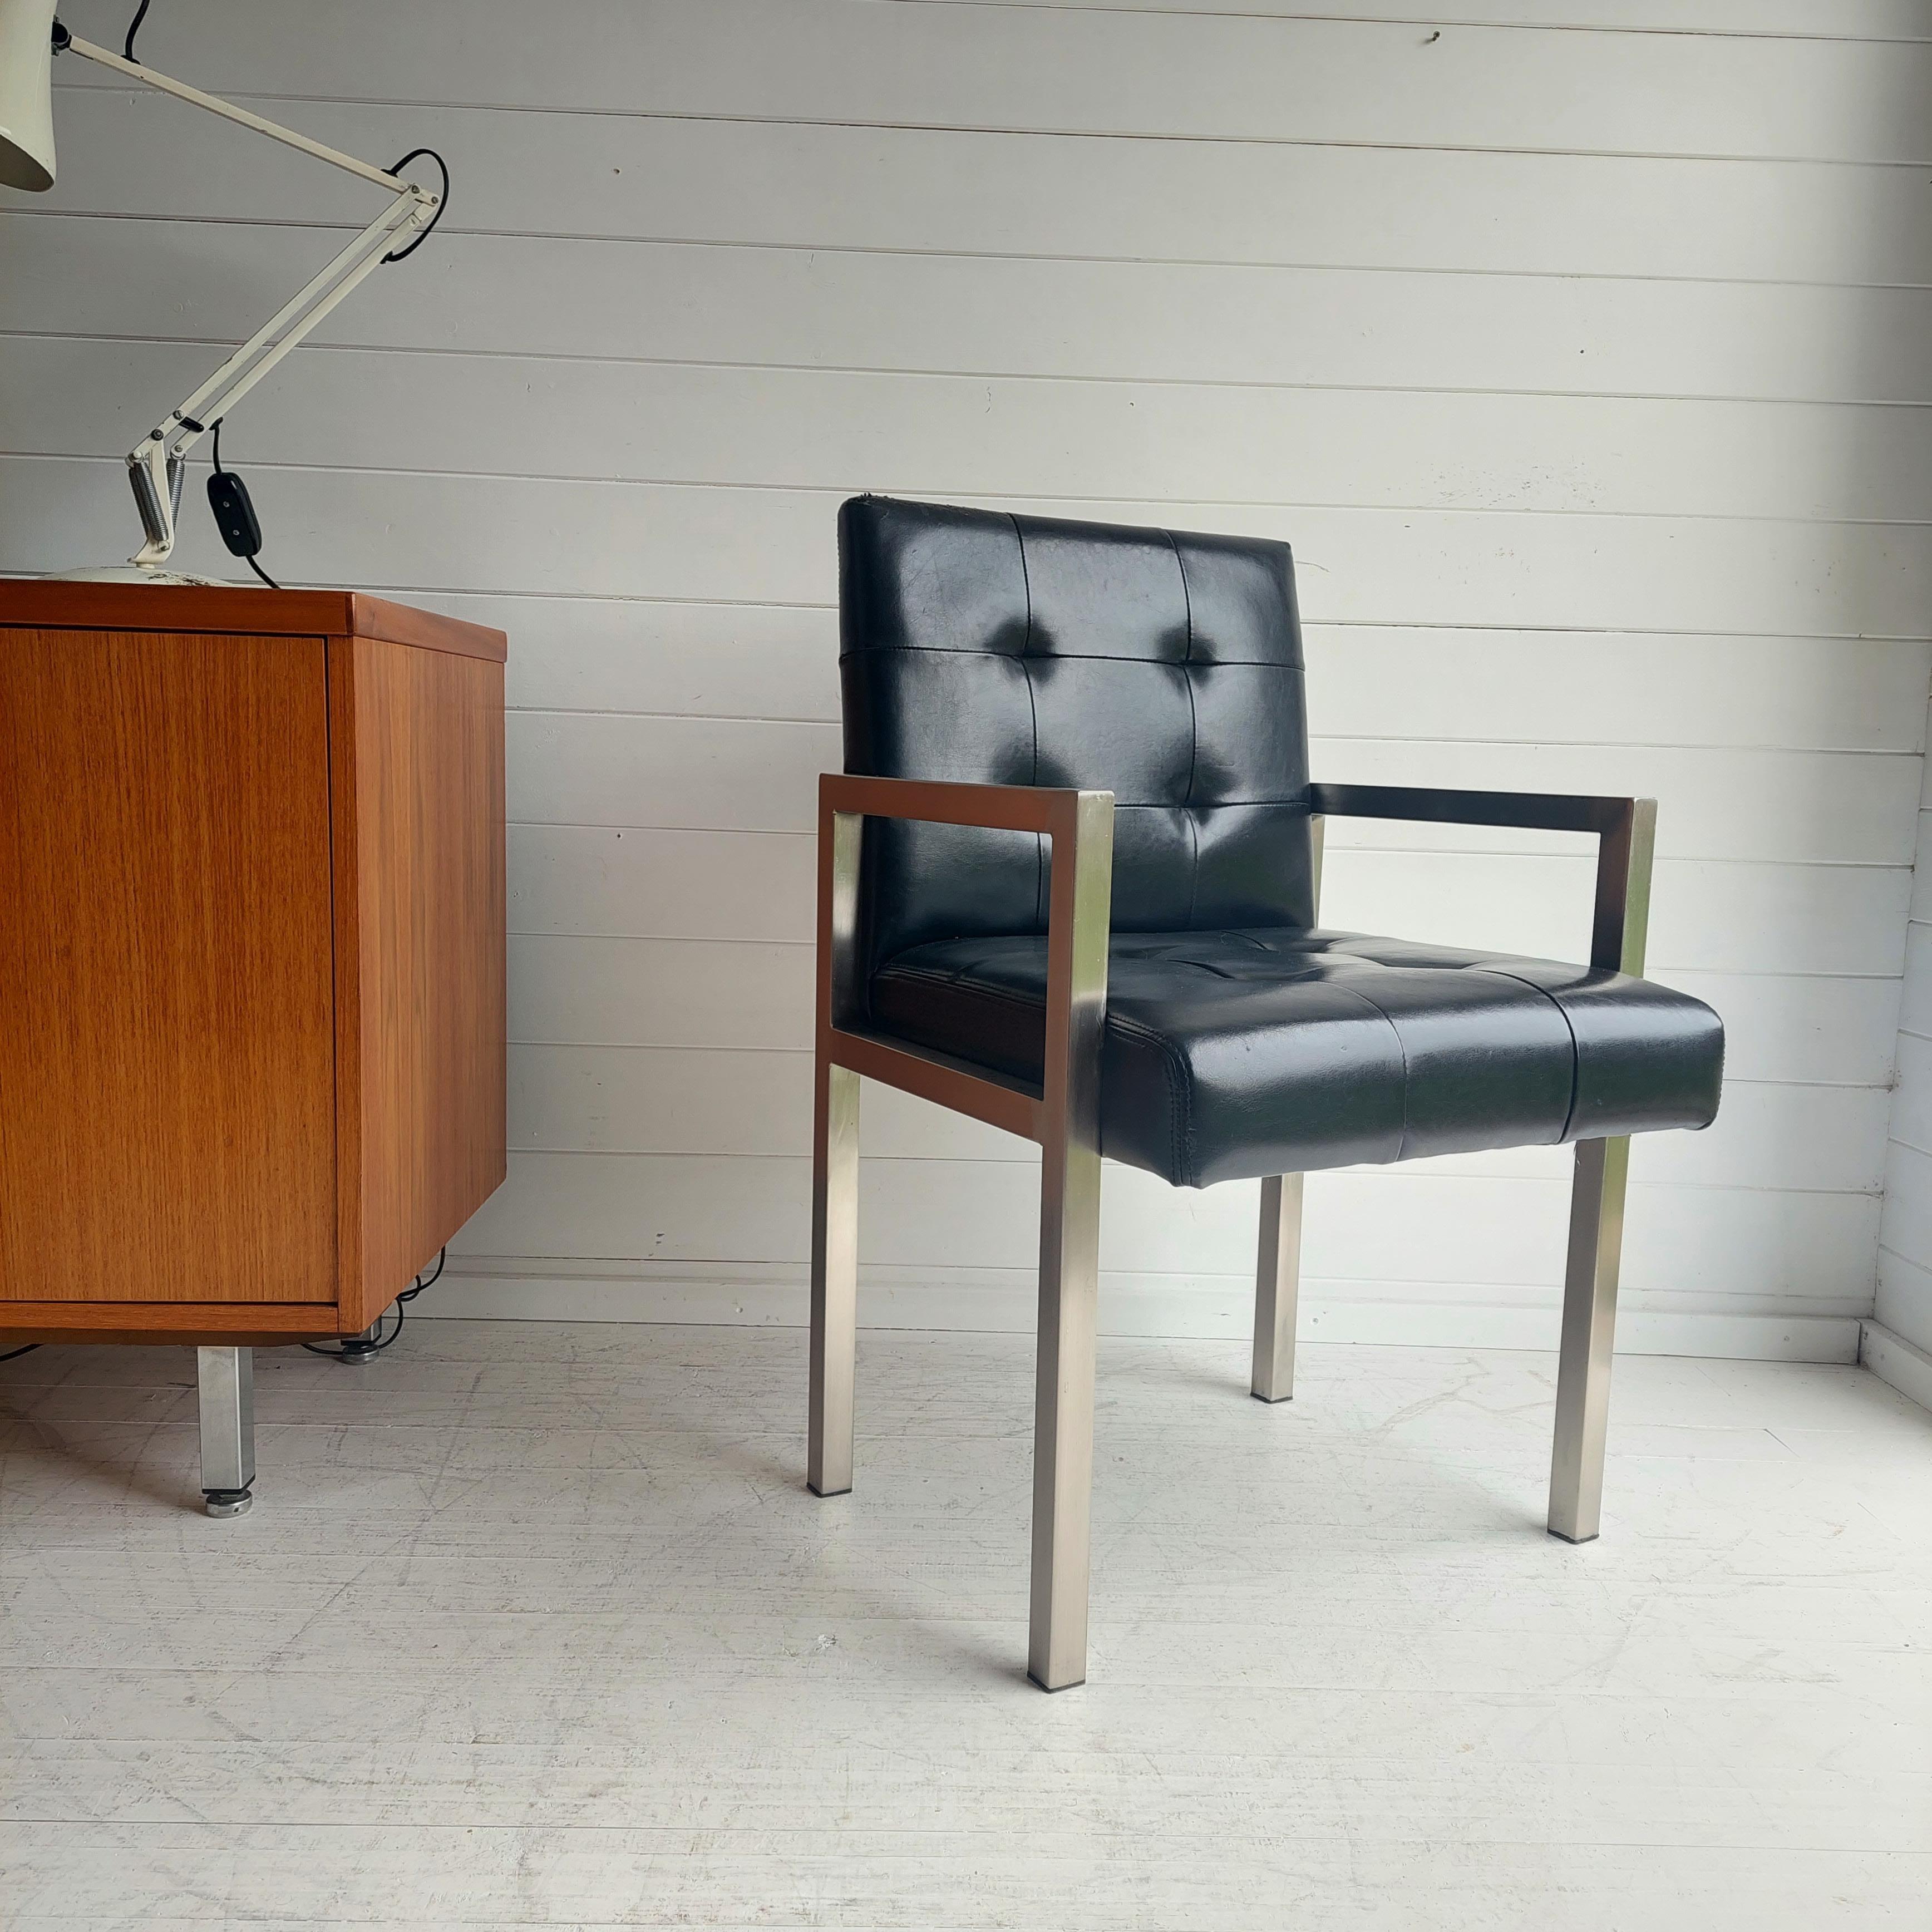 Stunning mid century modern armchairs designed under Knoll influence

With square chrome frames and armrests. 
The seat and back rests are elegantly padded with cushioning detail and use the original black vinyl.

 Sleek design with thick